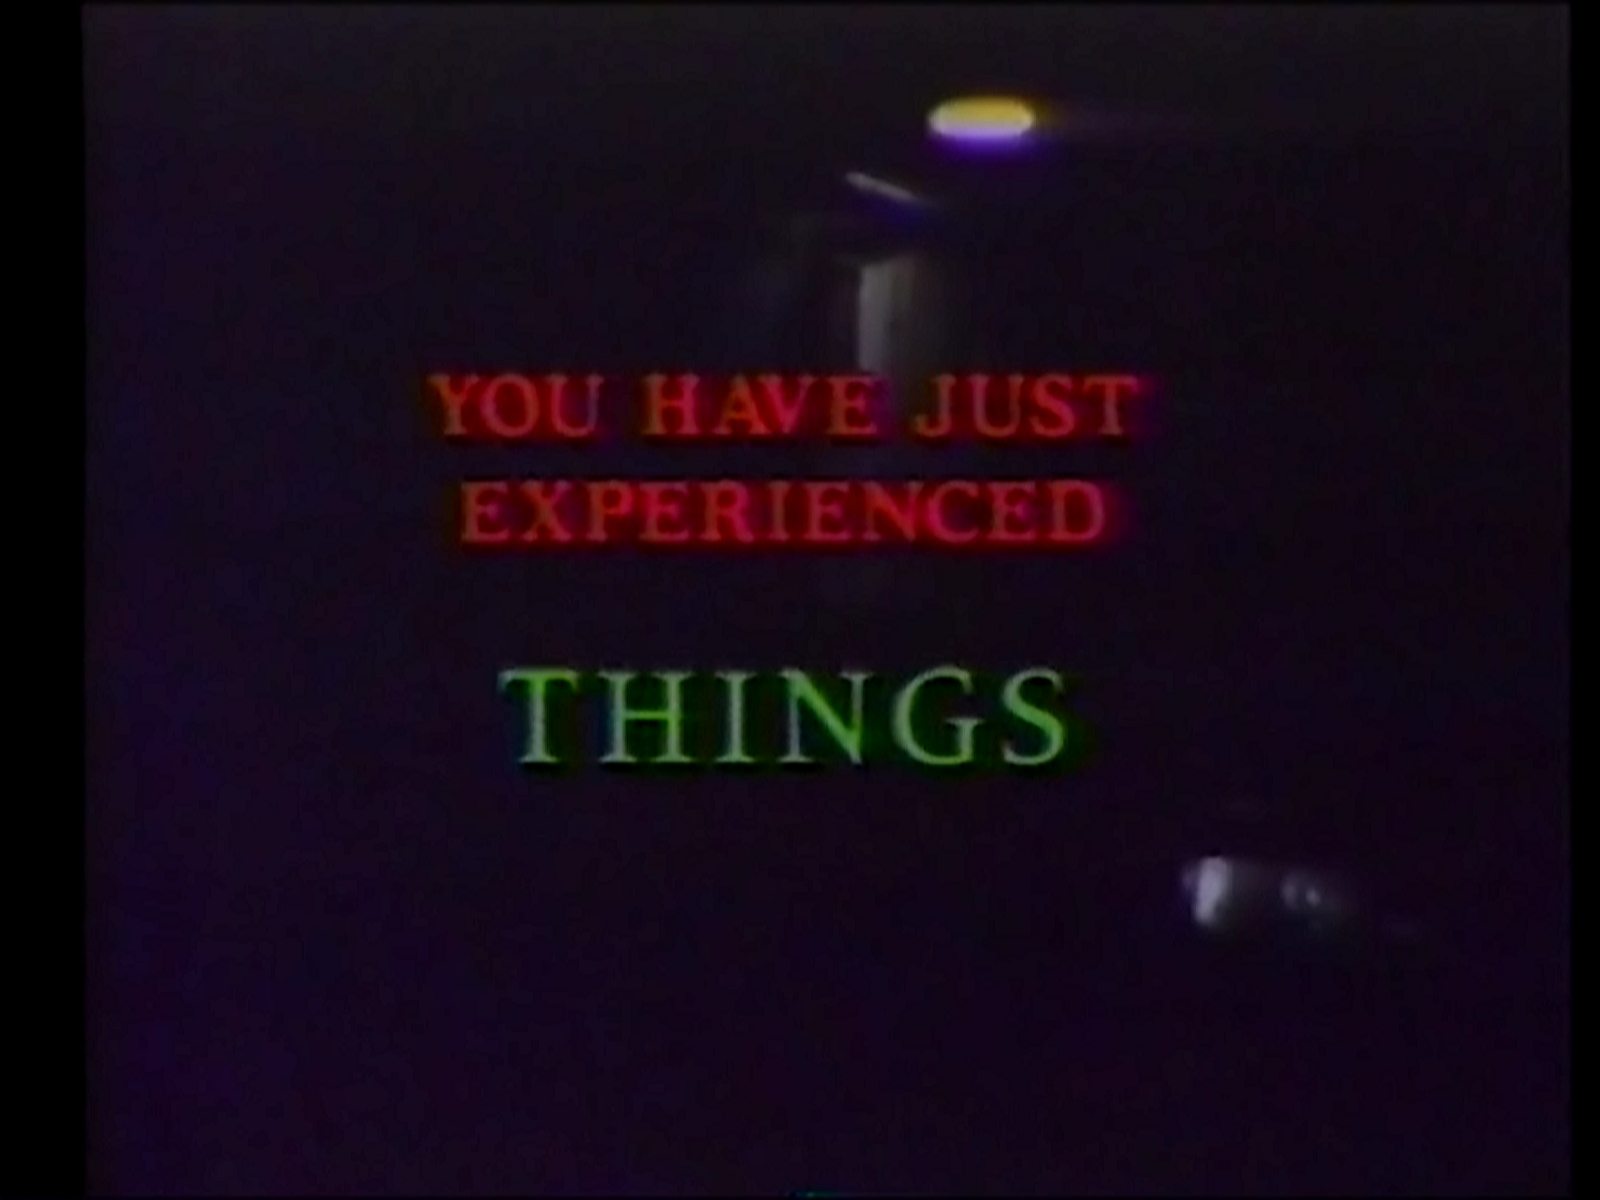 http://sinsofcinema.com/Images/Things/Things%20Gillis%20Intervision%20Picture%20Corp%20DVD%20Cover.jpg